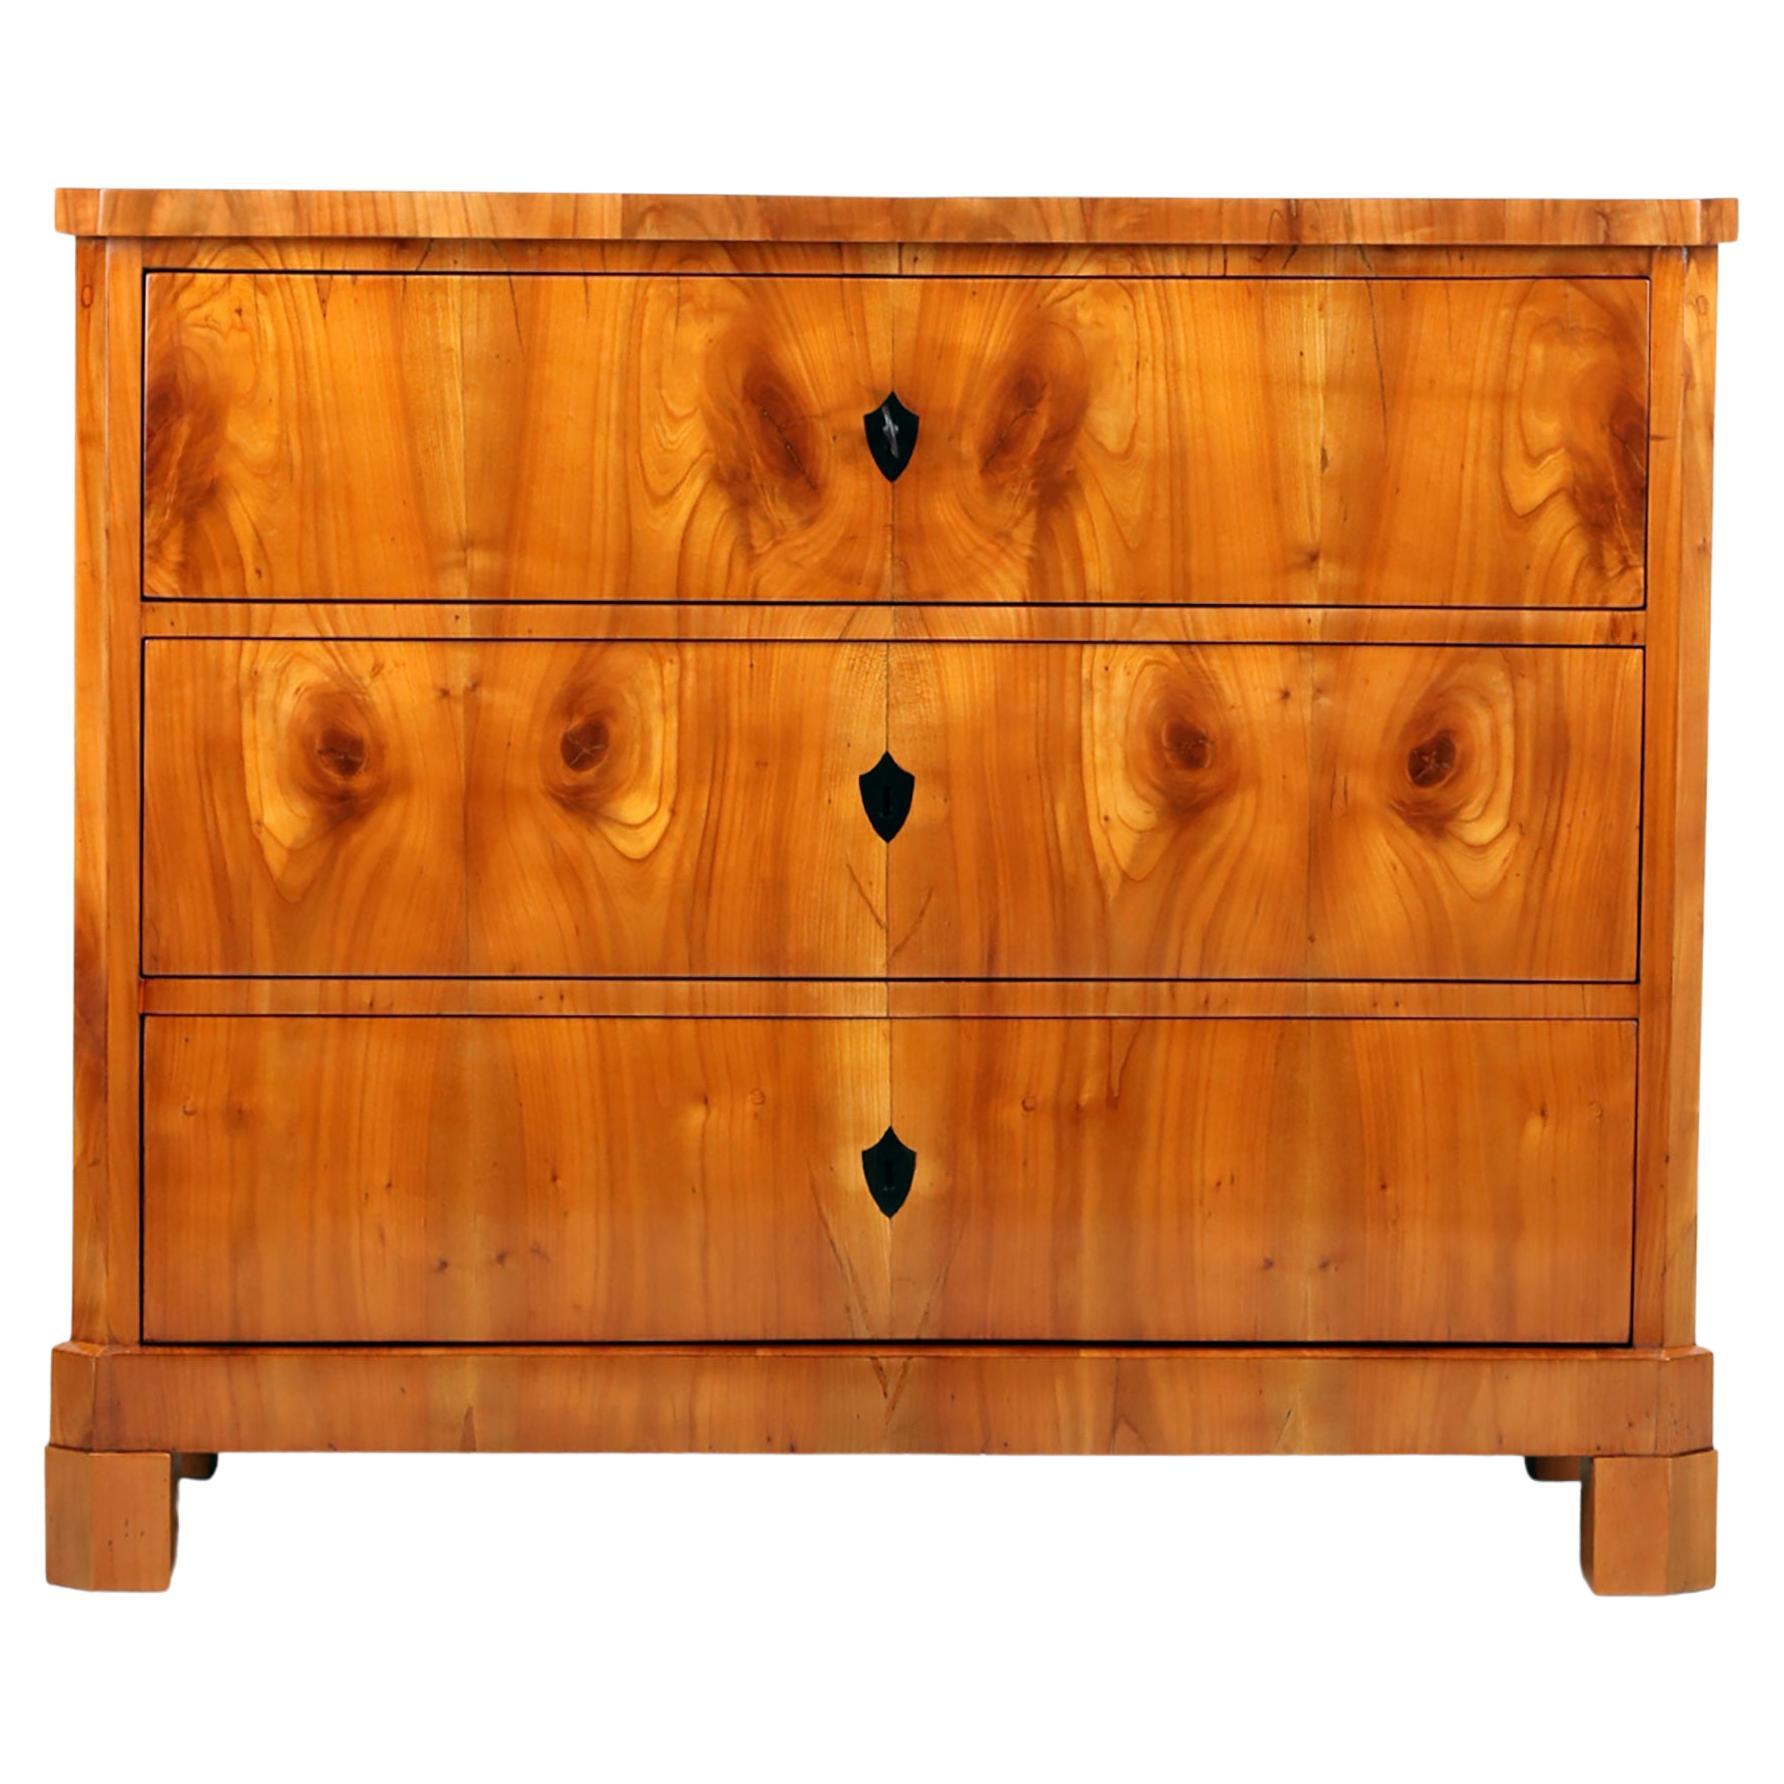 Biedermeier Chest of drawers, South Germany ca. 1820

The chest with three drawers is standing on four solid block feets. 
Cherry wood veneered on softwood. Continuous grain from the base to the top plate. Mirrored and strictly symmetrical